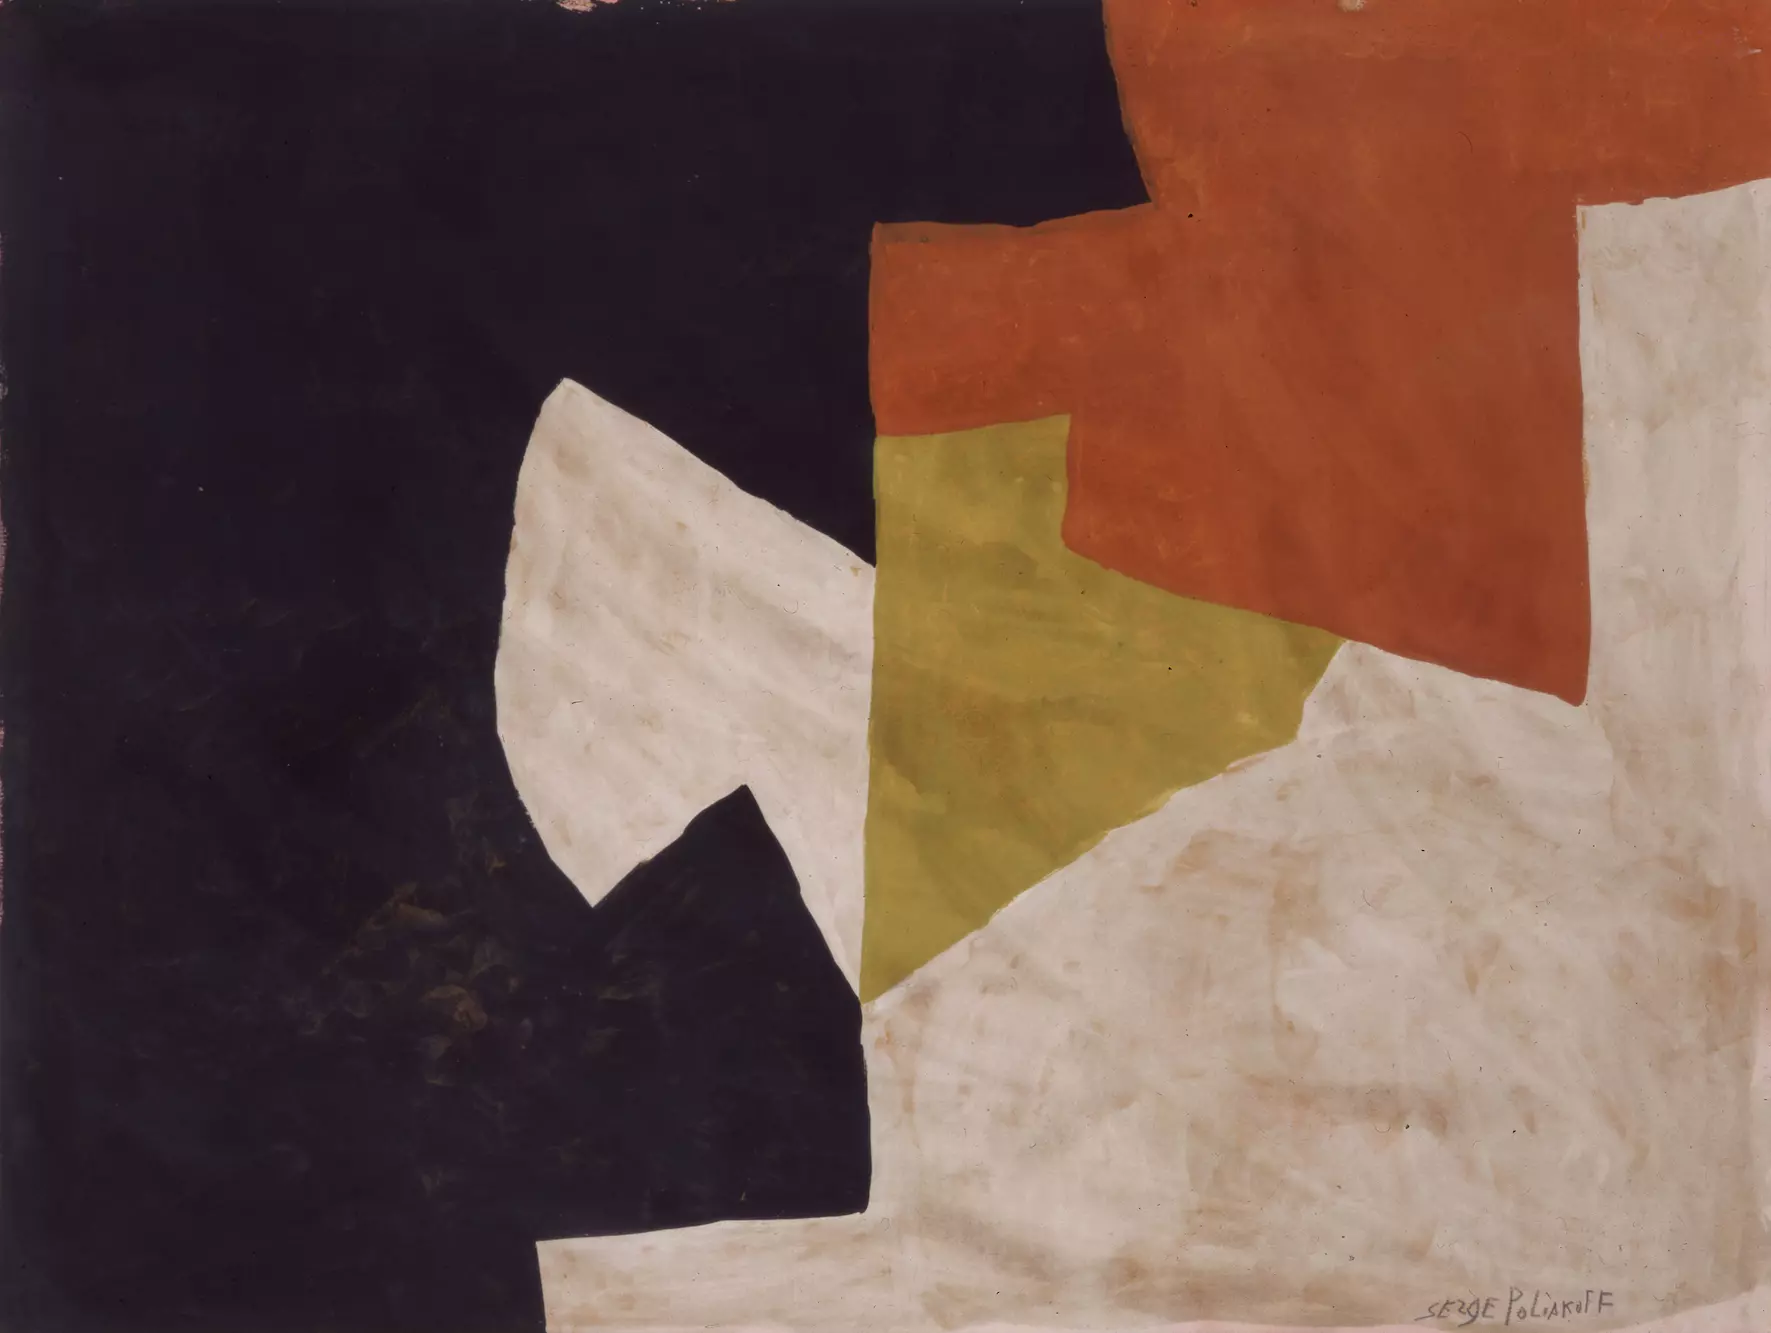 The Home of Dina Vierny par Marie Anne Derville - Serge Poliakoff